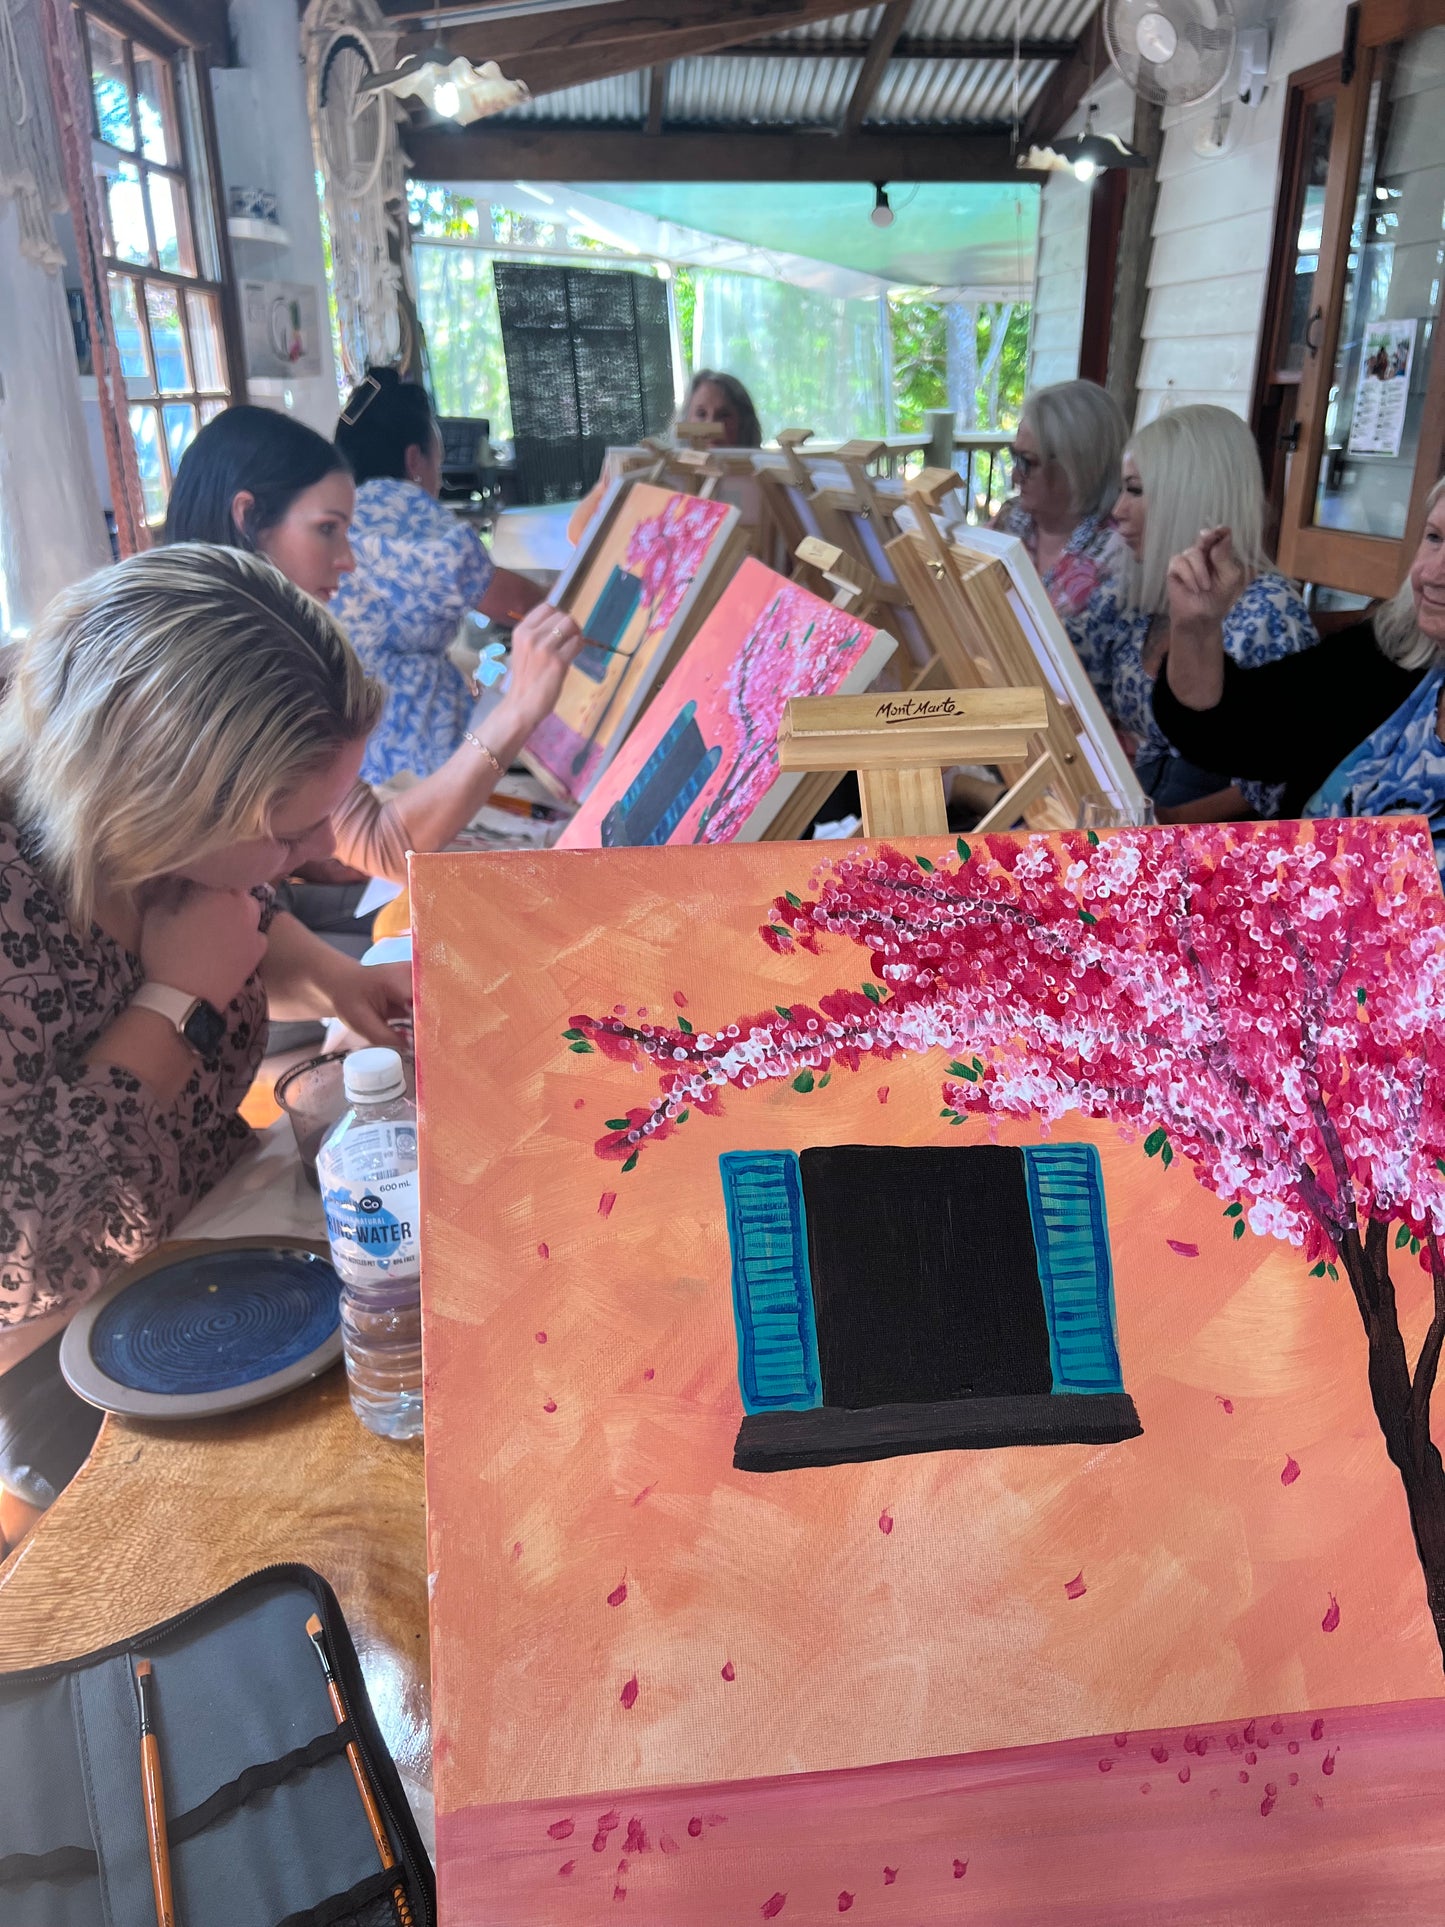 Painting Class: Cherry Blossoms